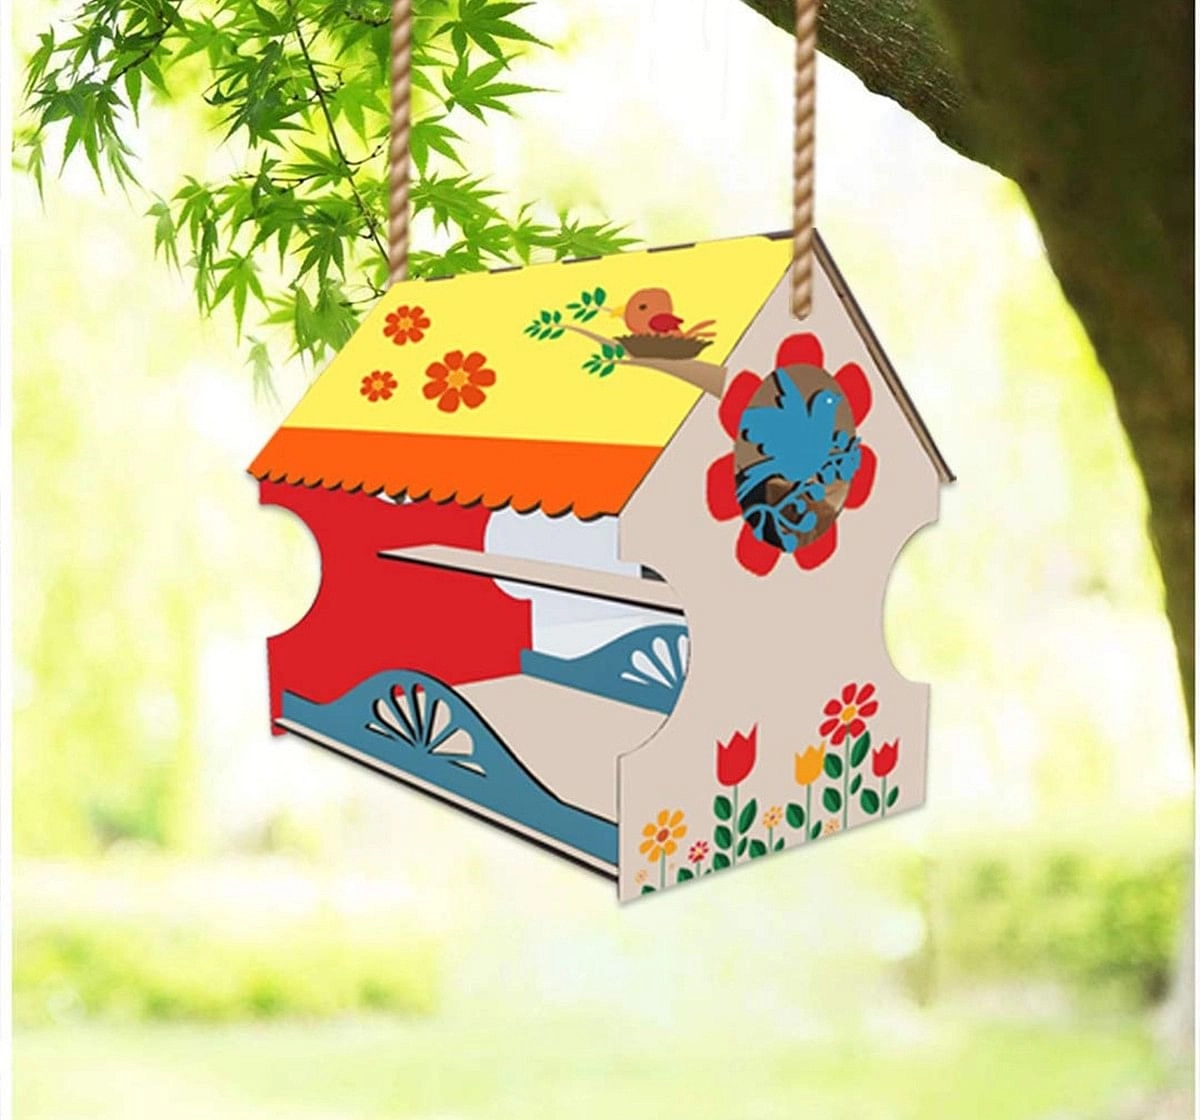 Webby DIY Wooden Build & Paint Hut Shaped Bird House for Kids Toy,  3Y+ (Multicolour)